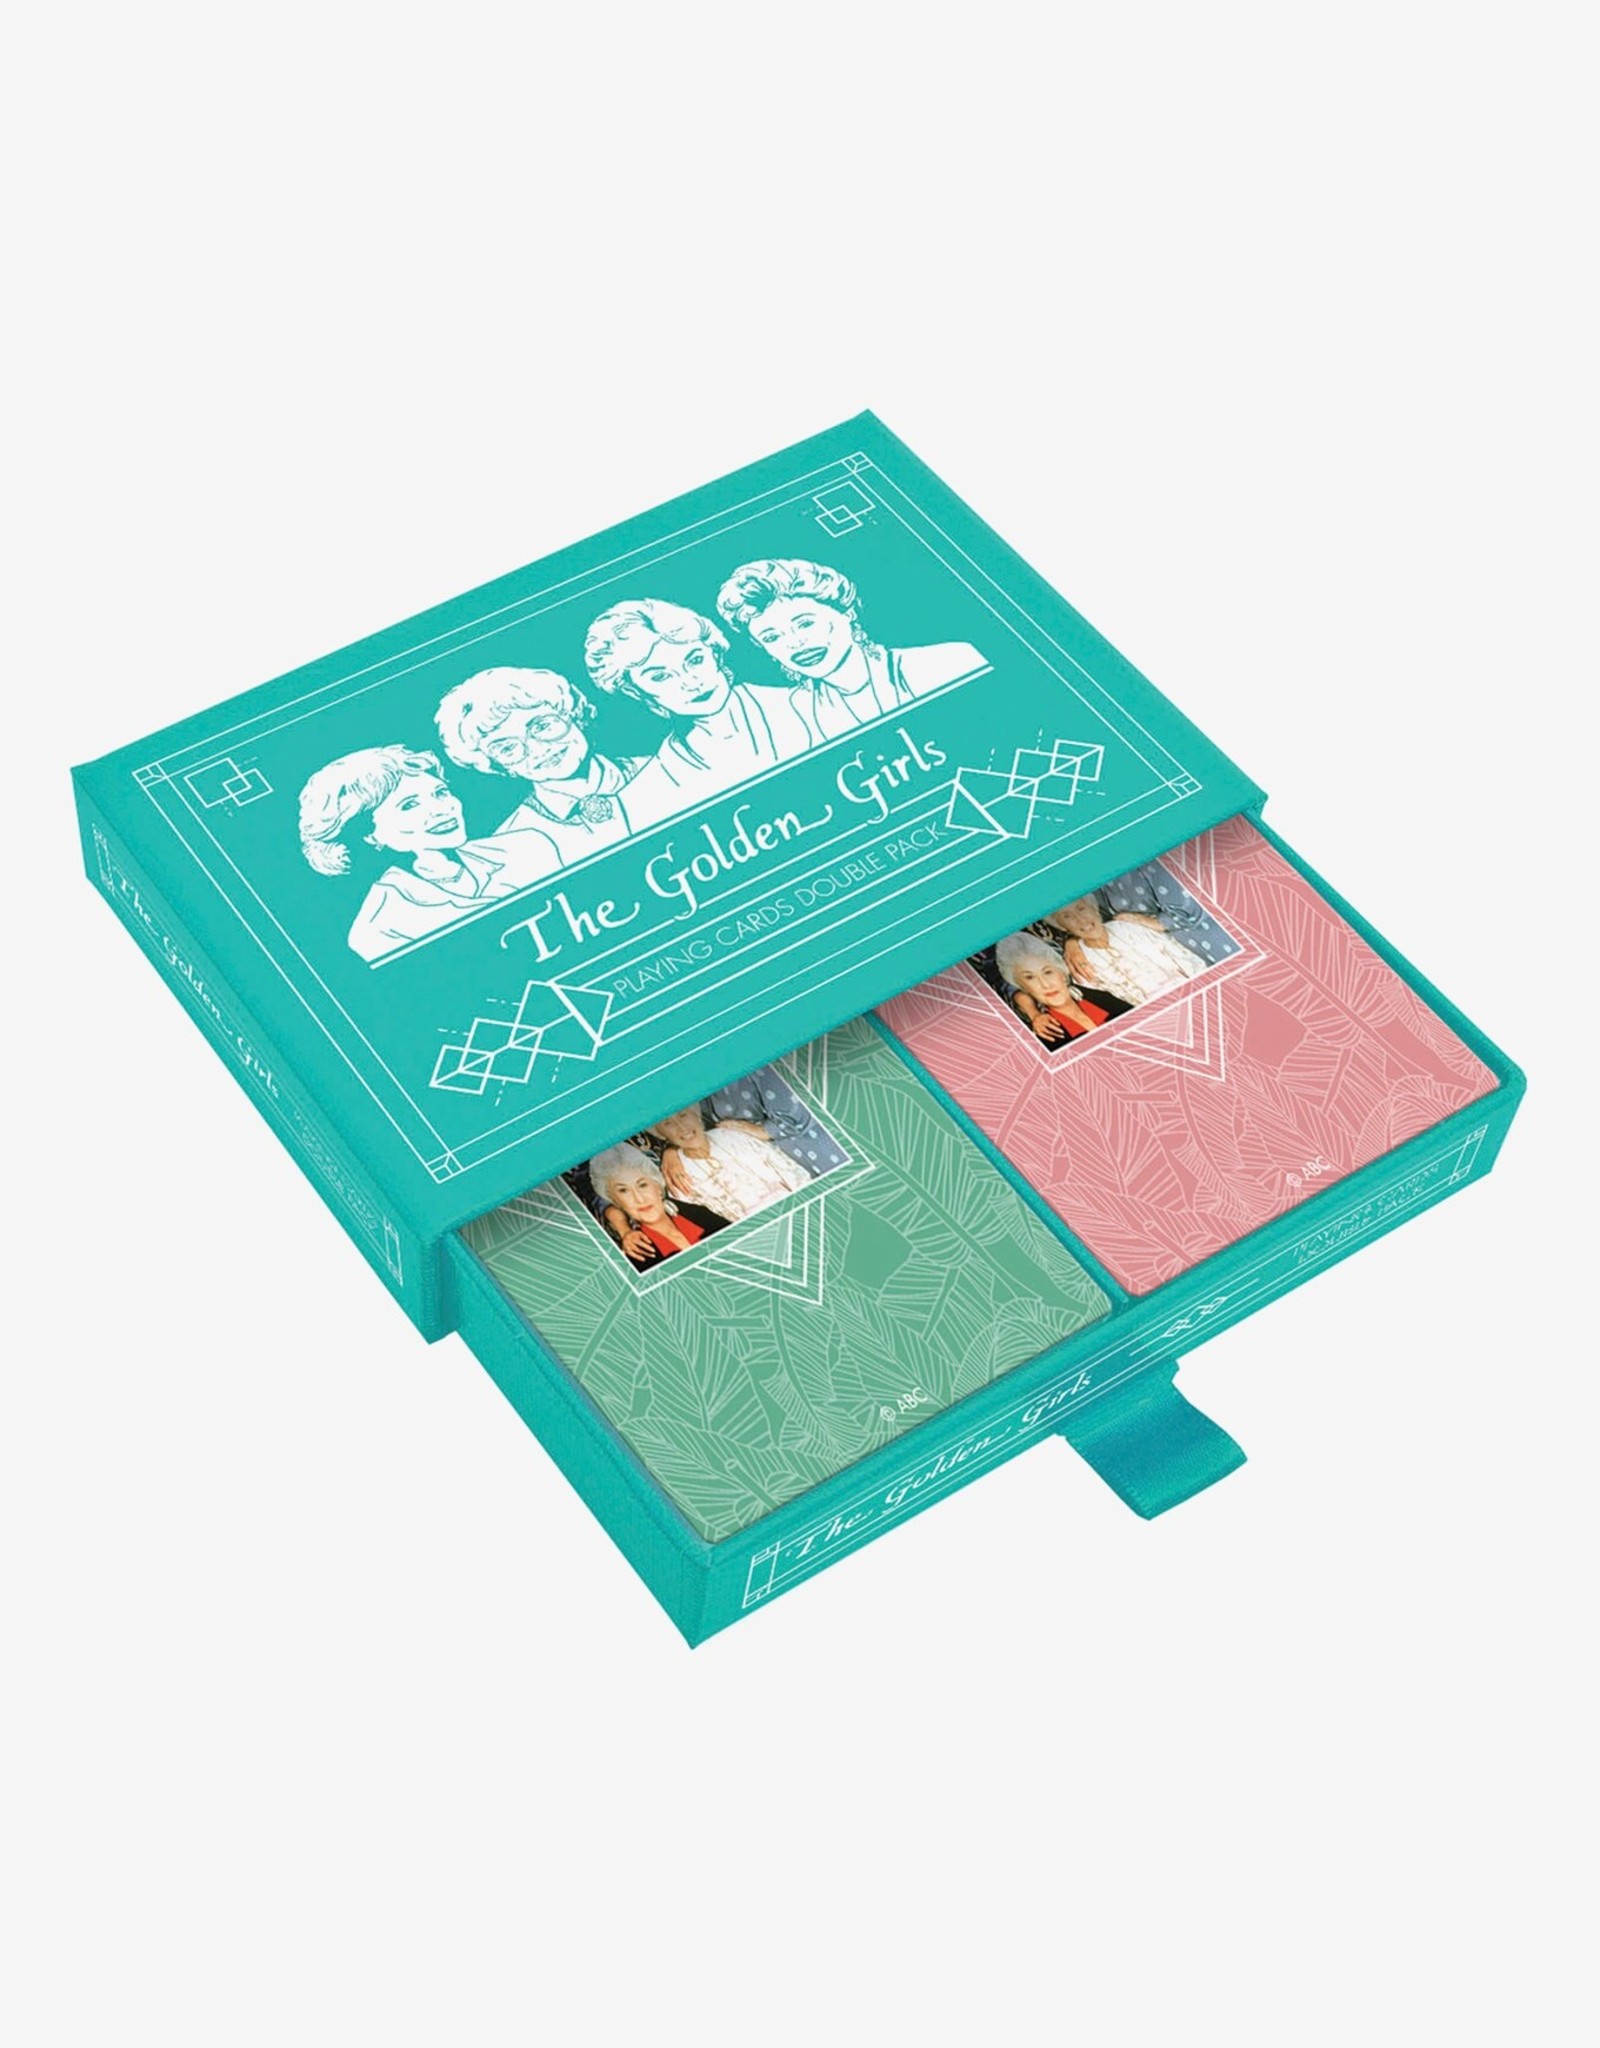 Usaopoly Playing Card Set: The Golden Girls